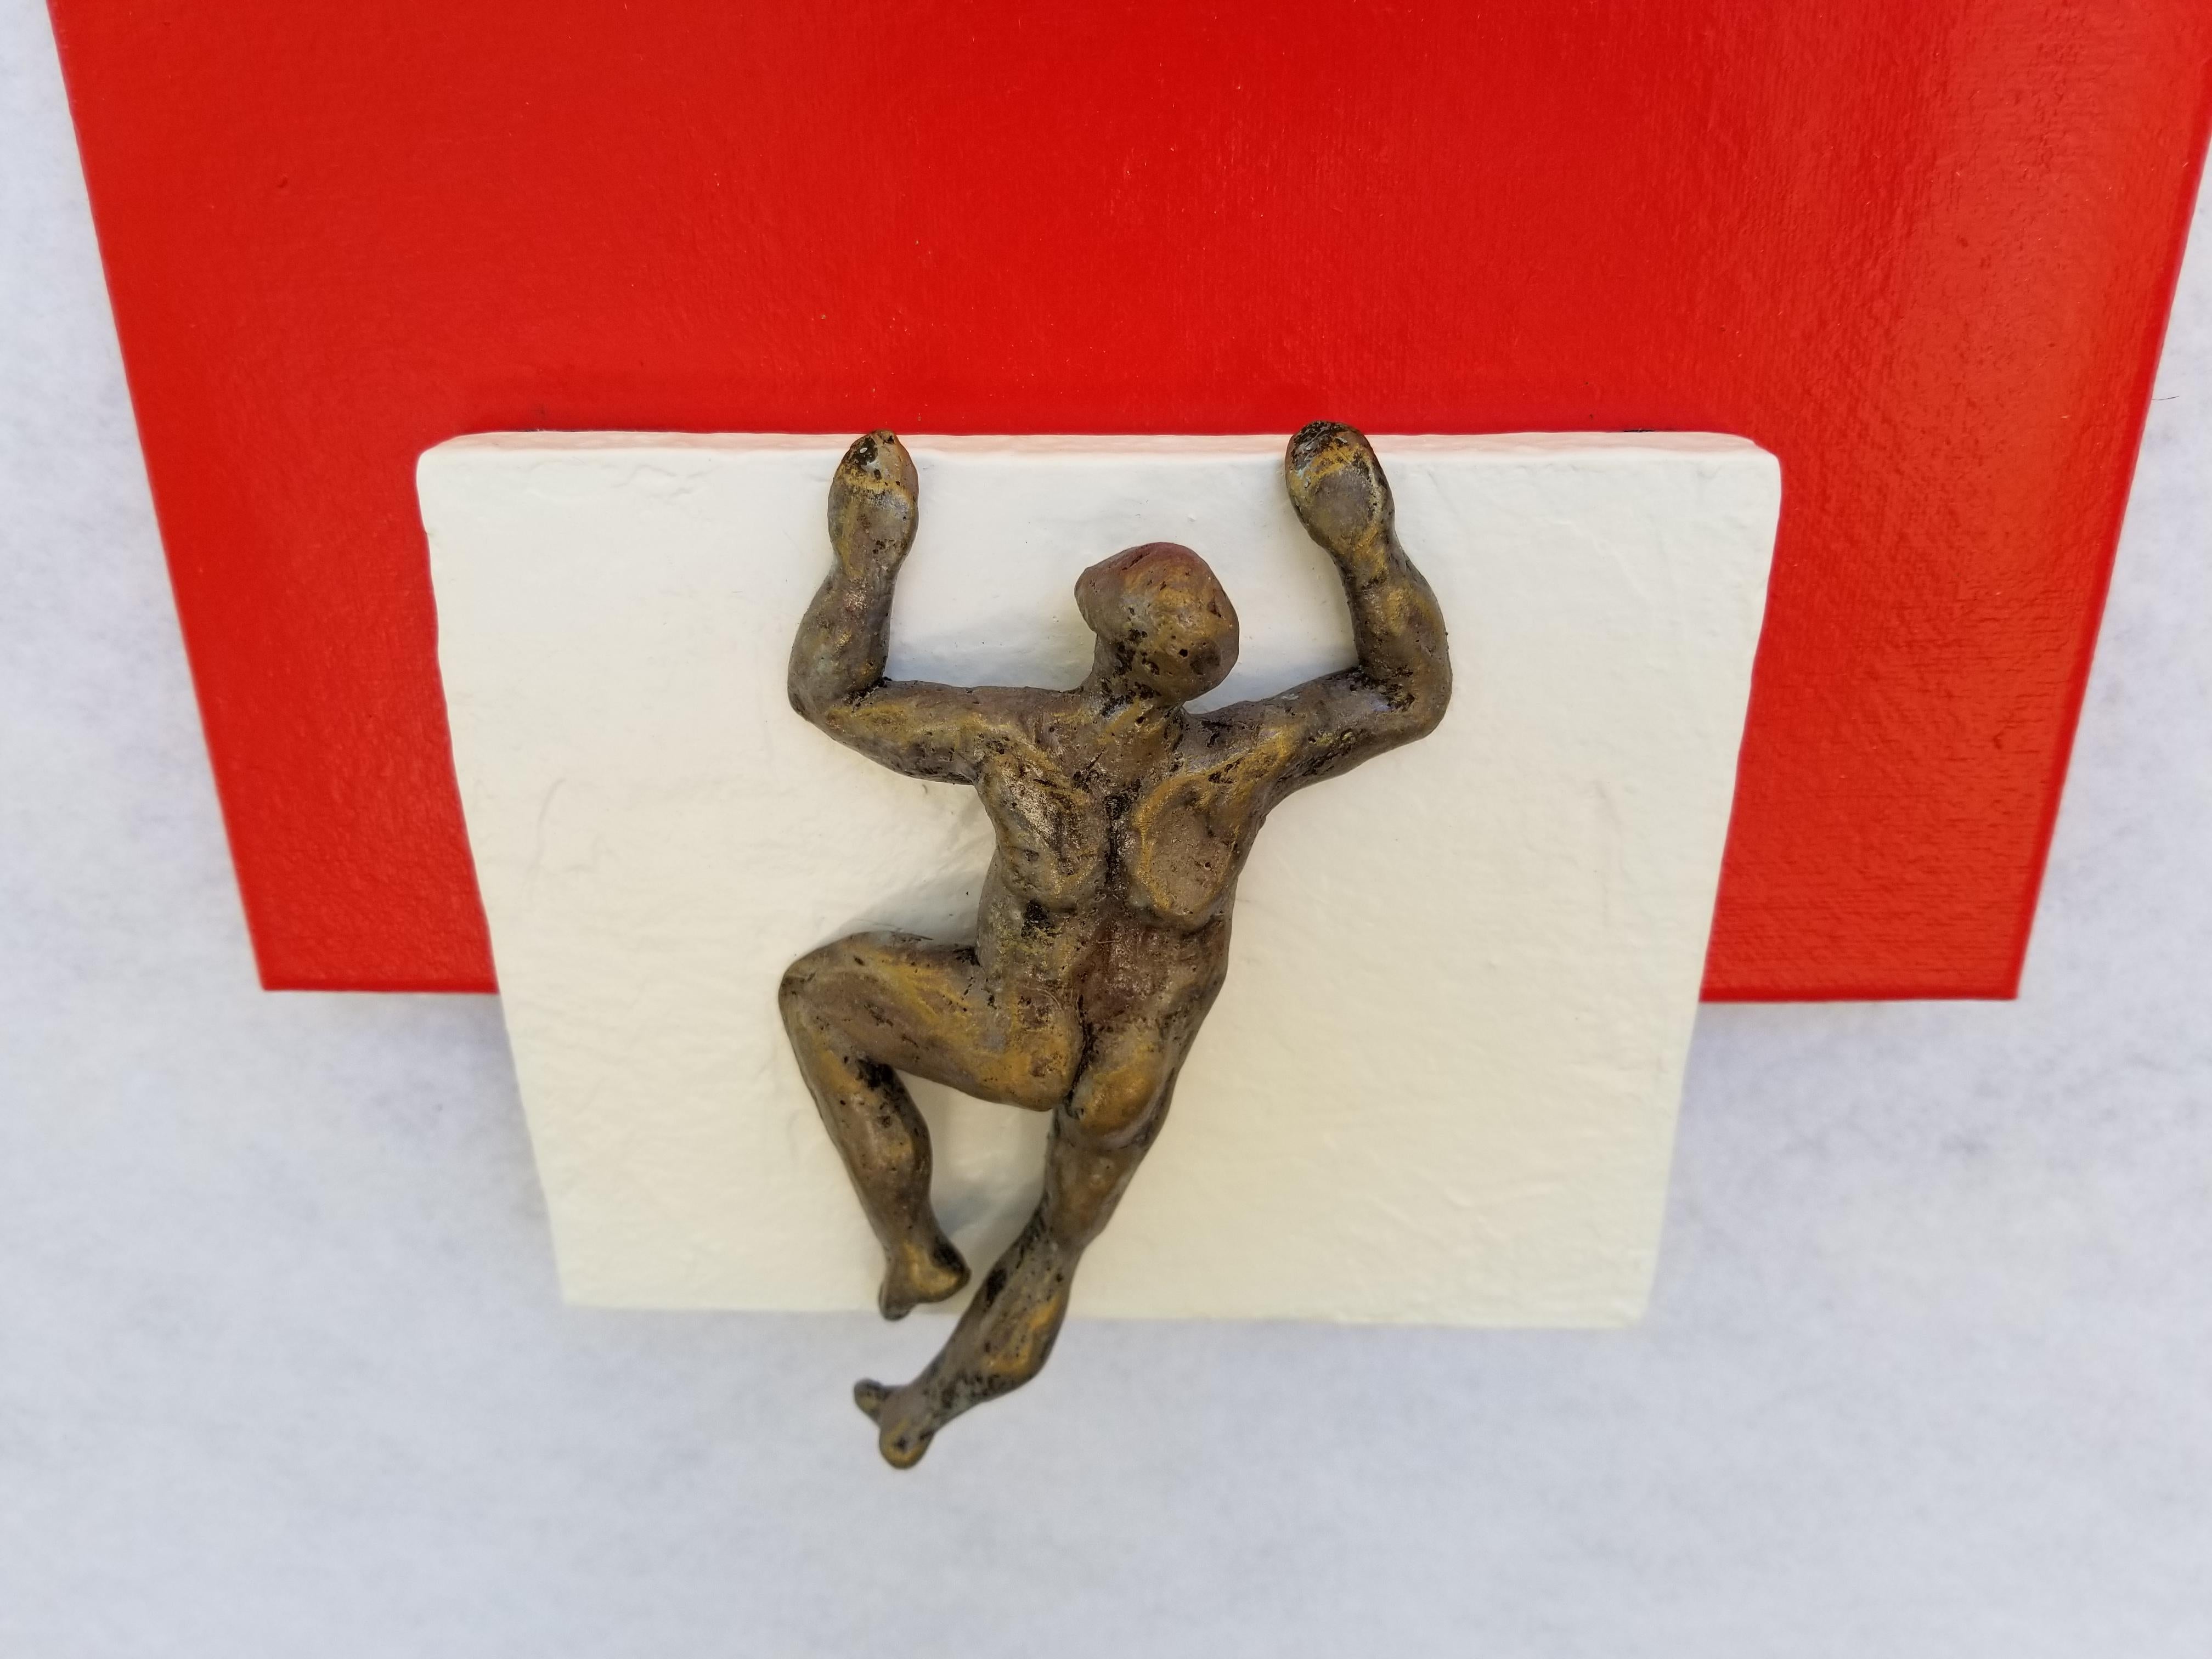 <p>Artist Comments<br>Inspired by minimalist sculptures, artist Yelitza Diaz executes a concept where a human figure becomes part of contemporary work. She plays with basic geometry and adds the man as a common environmental element. The metallic